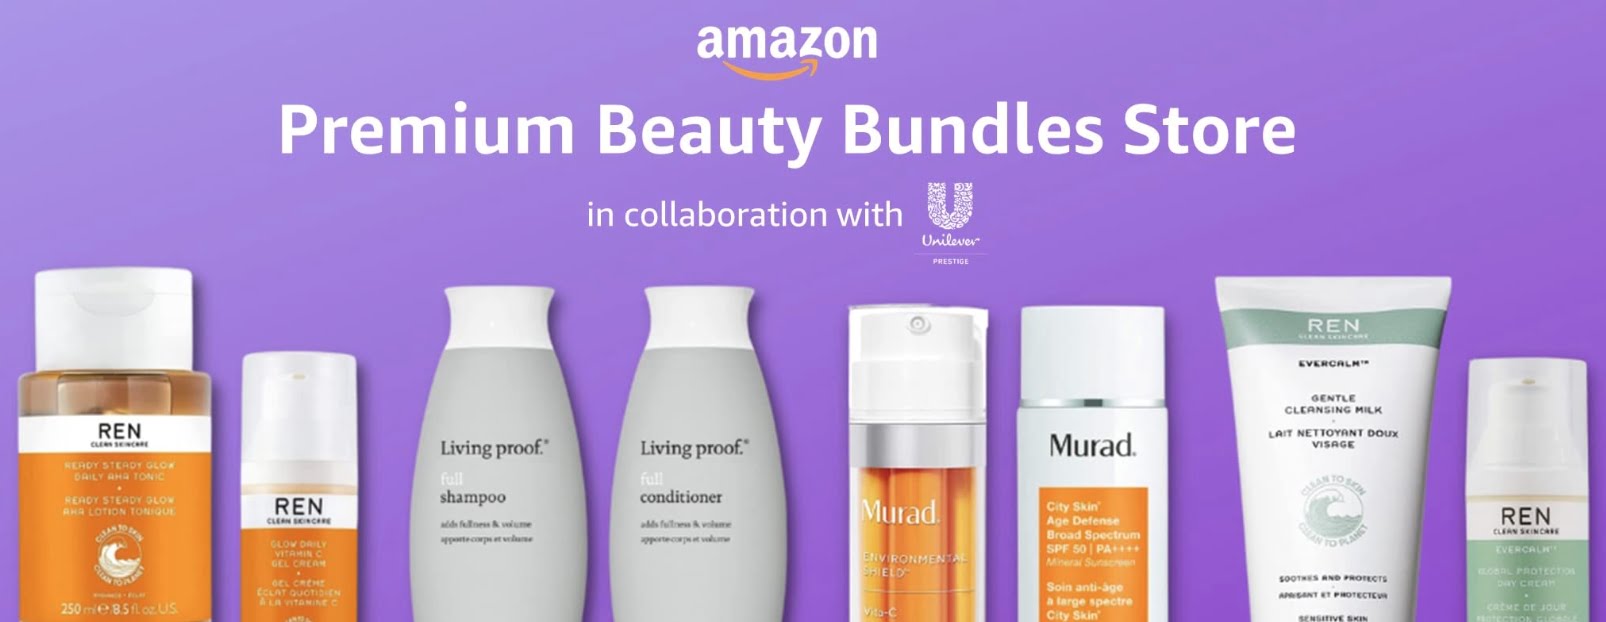 Up to 40% off premium beauty bundles store at Amazon